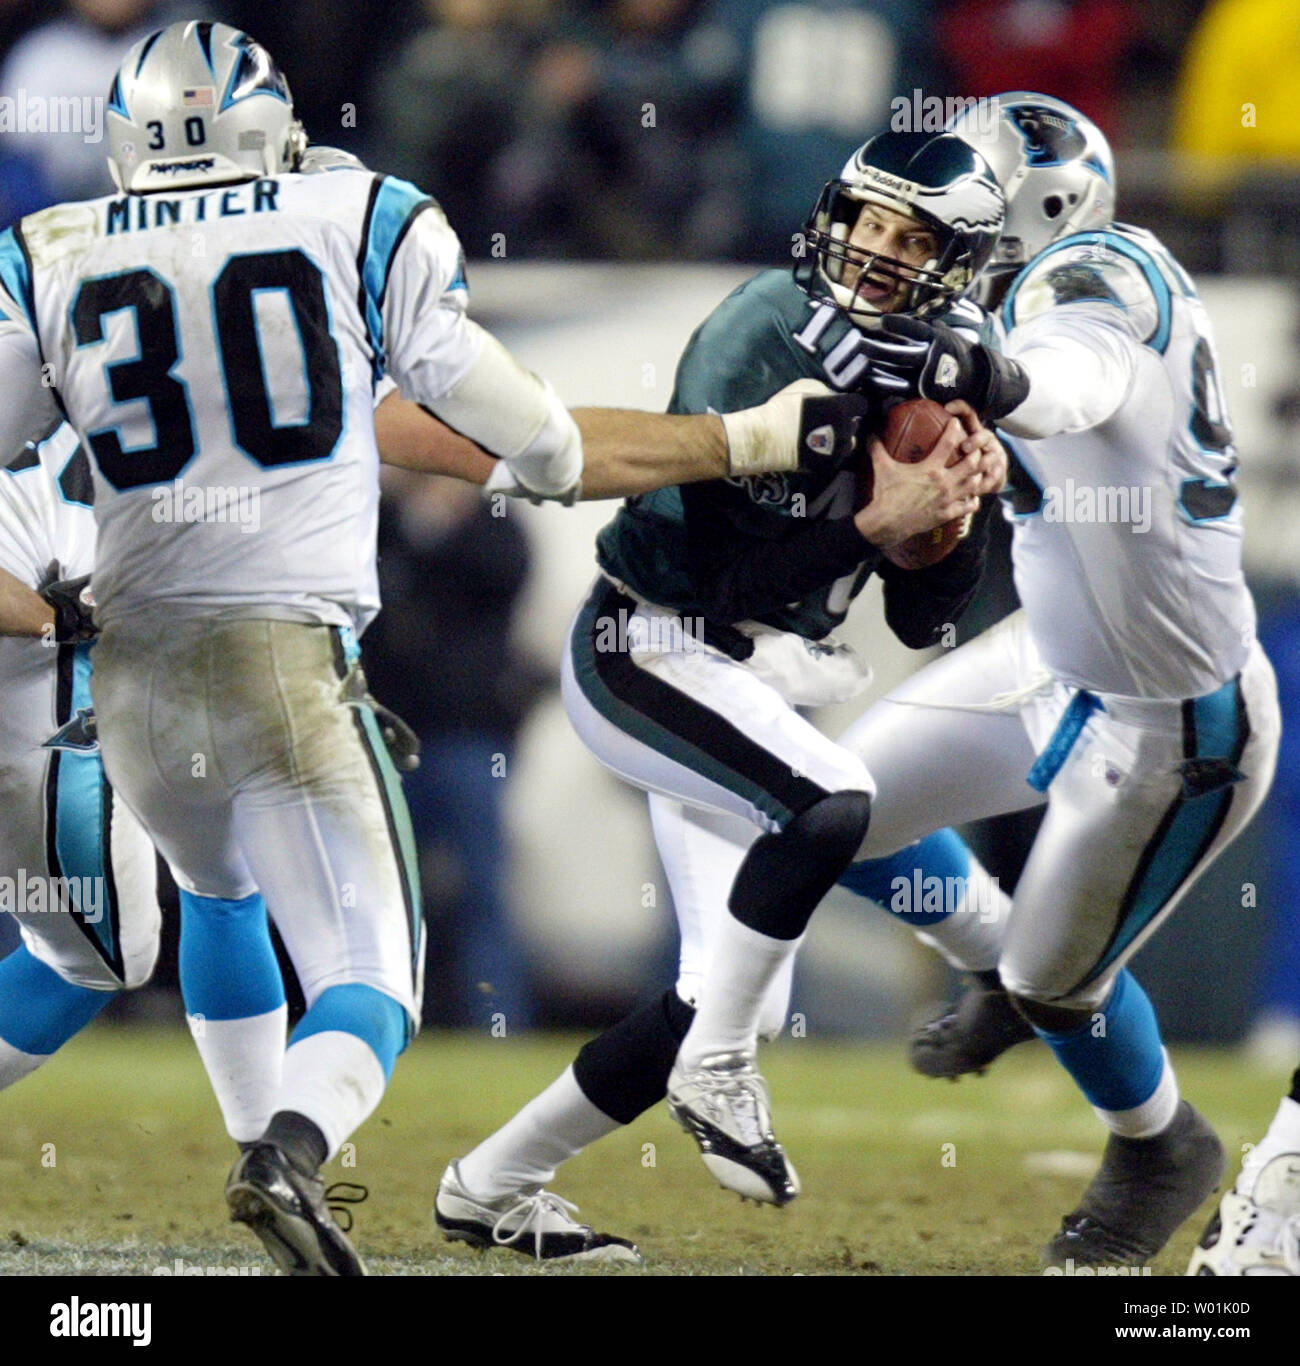 Carolina Panthers defender Micheal Rucker grabs the face mask of Philadelphia Eagles quarterback Koy Detmer. The Carolina Panthers defeated the Philadelphia Eagles 14-3 at  Lincoln Financial Park in Philadelphia, PA  on January 18, 2004.    (UPI Photo/John Angelillo) Stock Photo